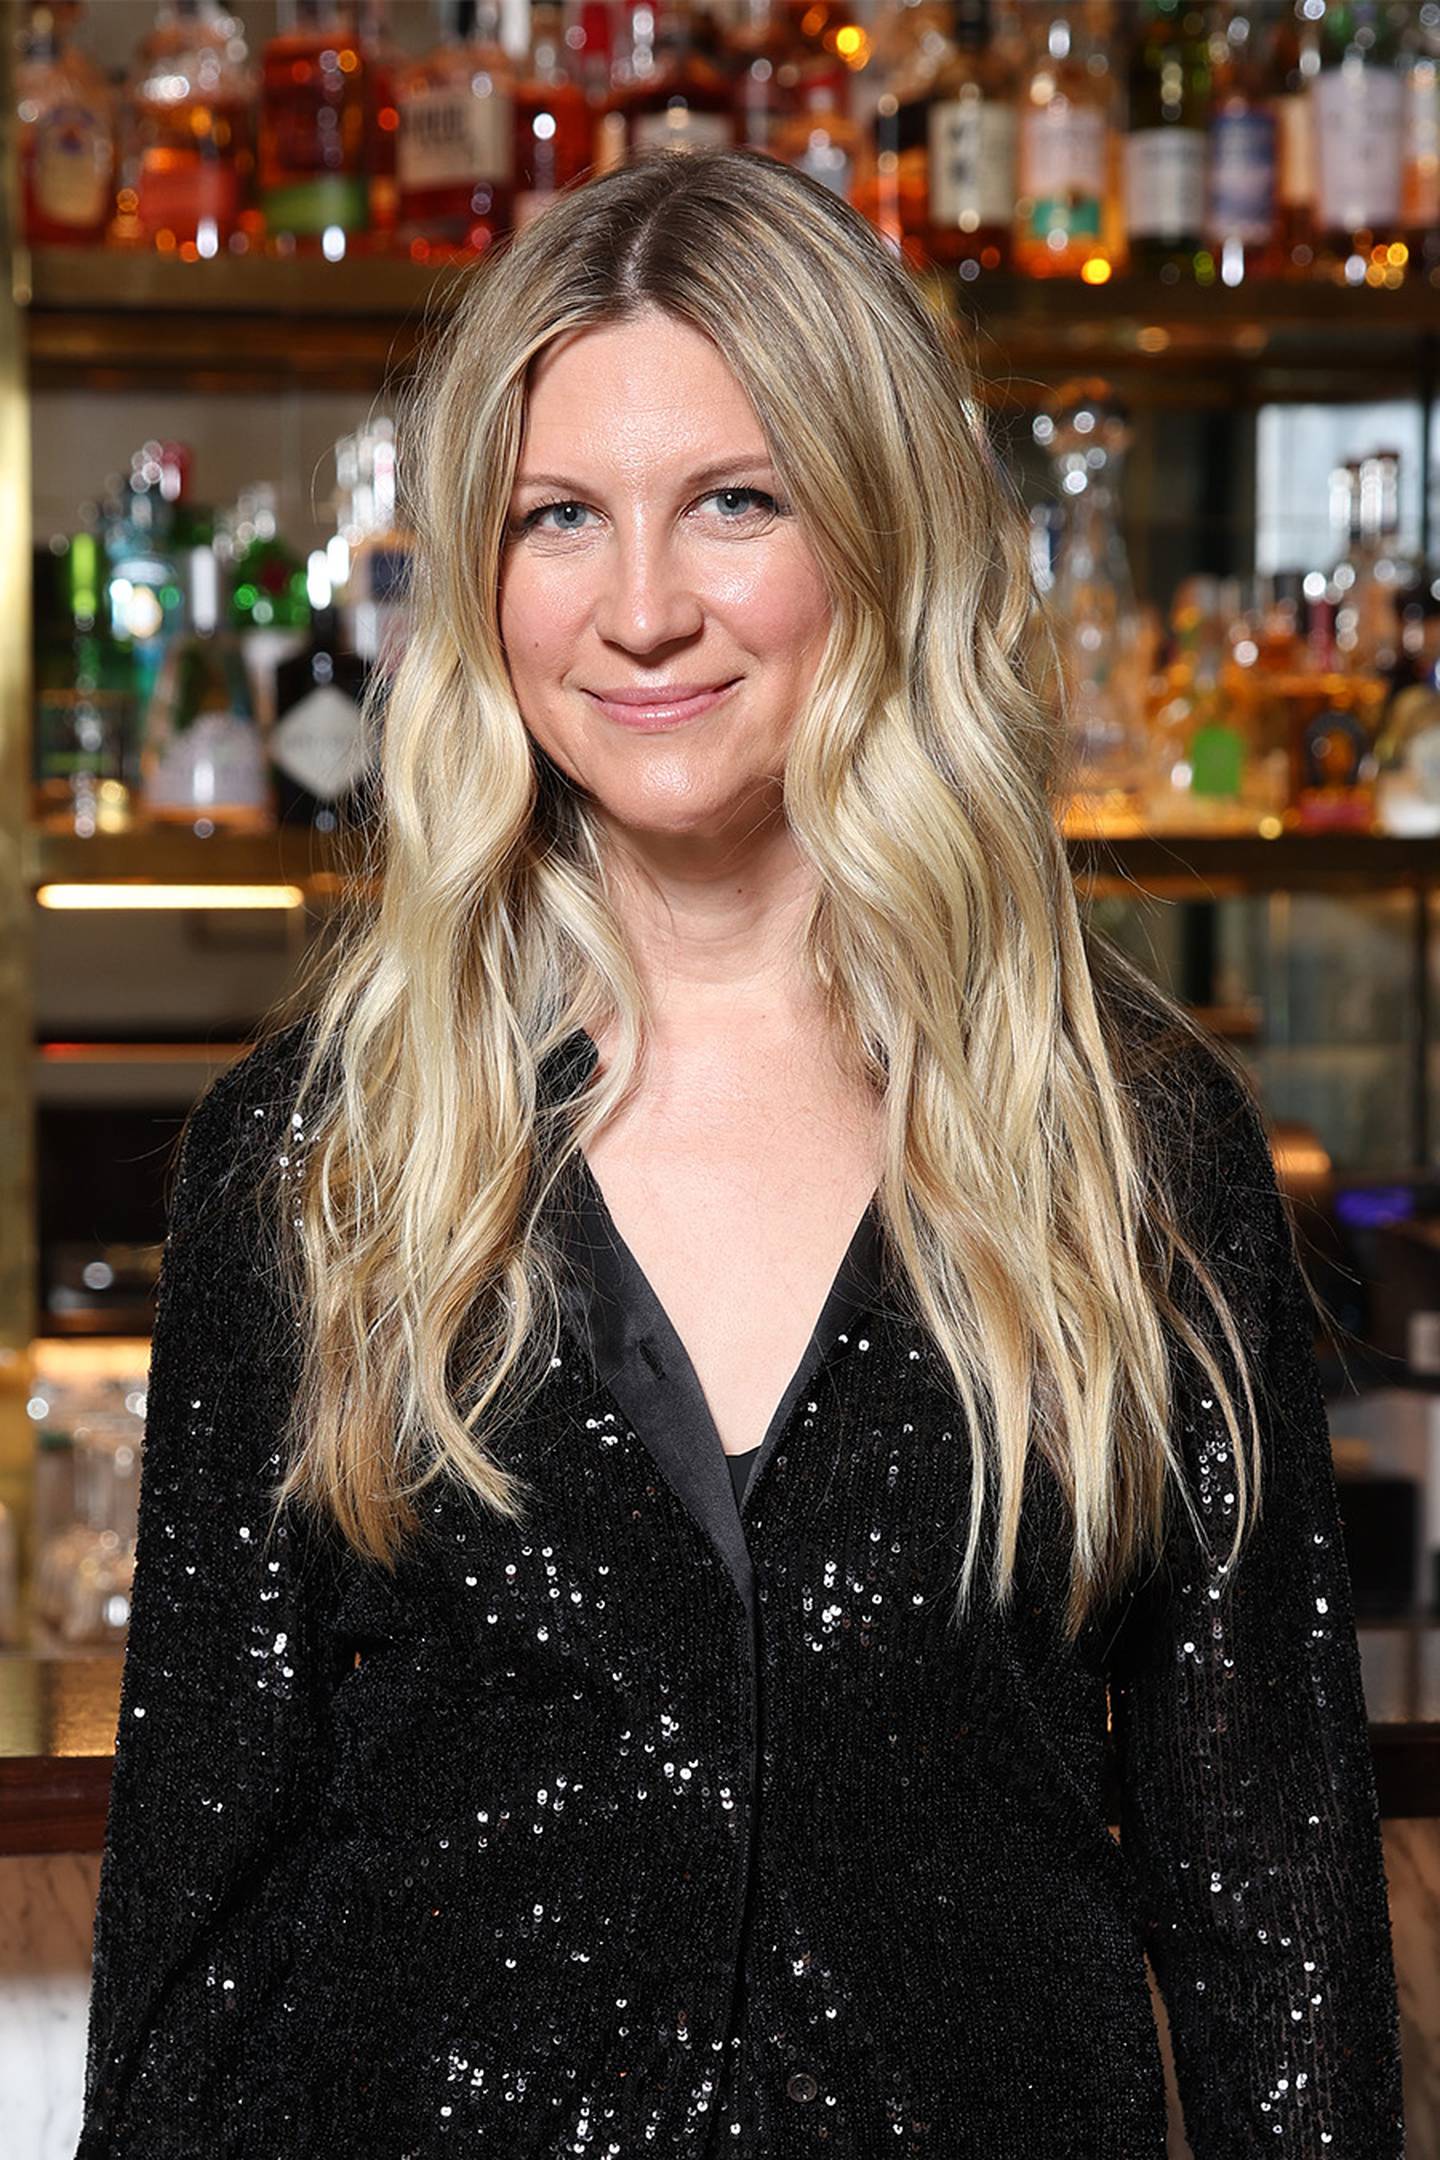 Kristina O'Neill attends the WSJ Magazine cocktail during Milan Design Week 2023 on April 18, 2023 in Milan, Italy.